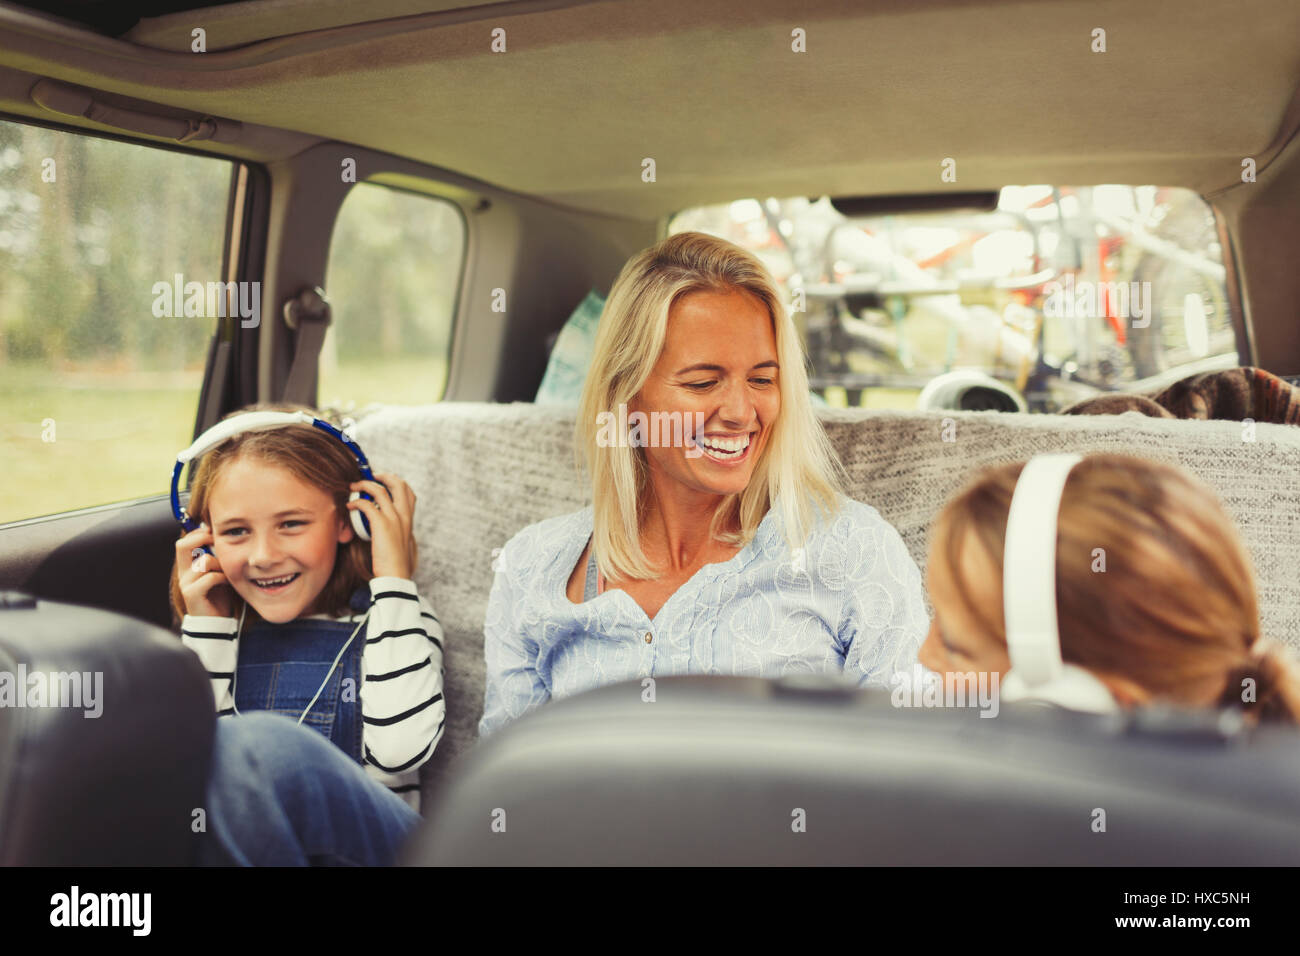 Laughing mother and daughters with headphones in back seat of car Stock Photo